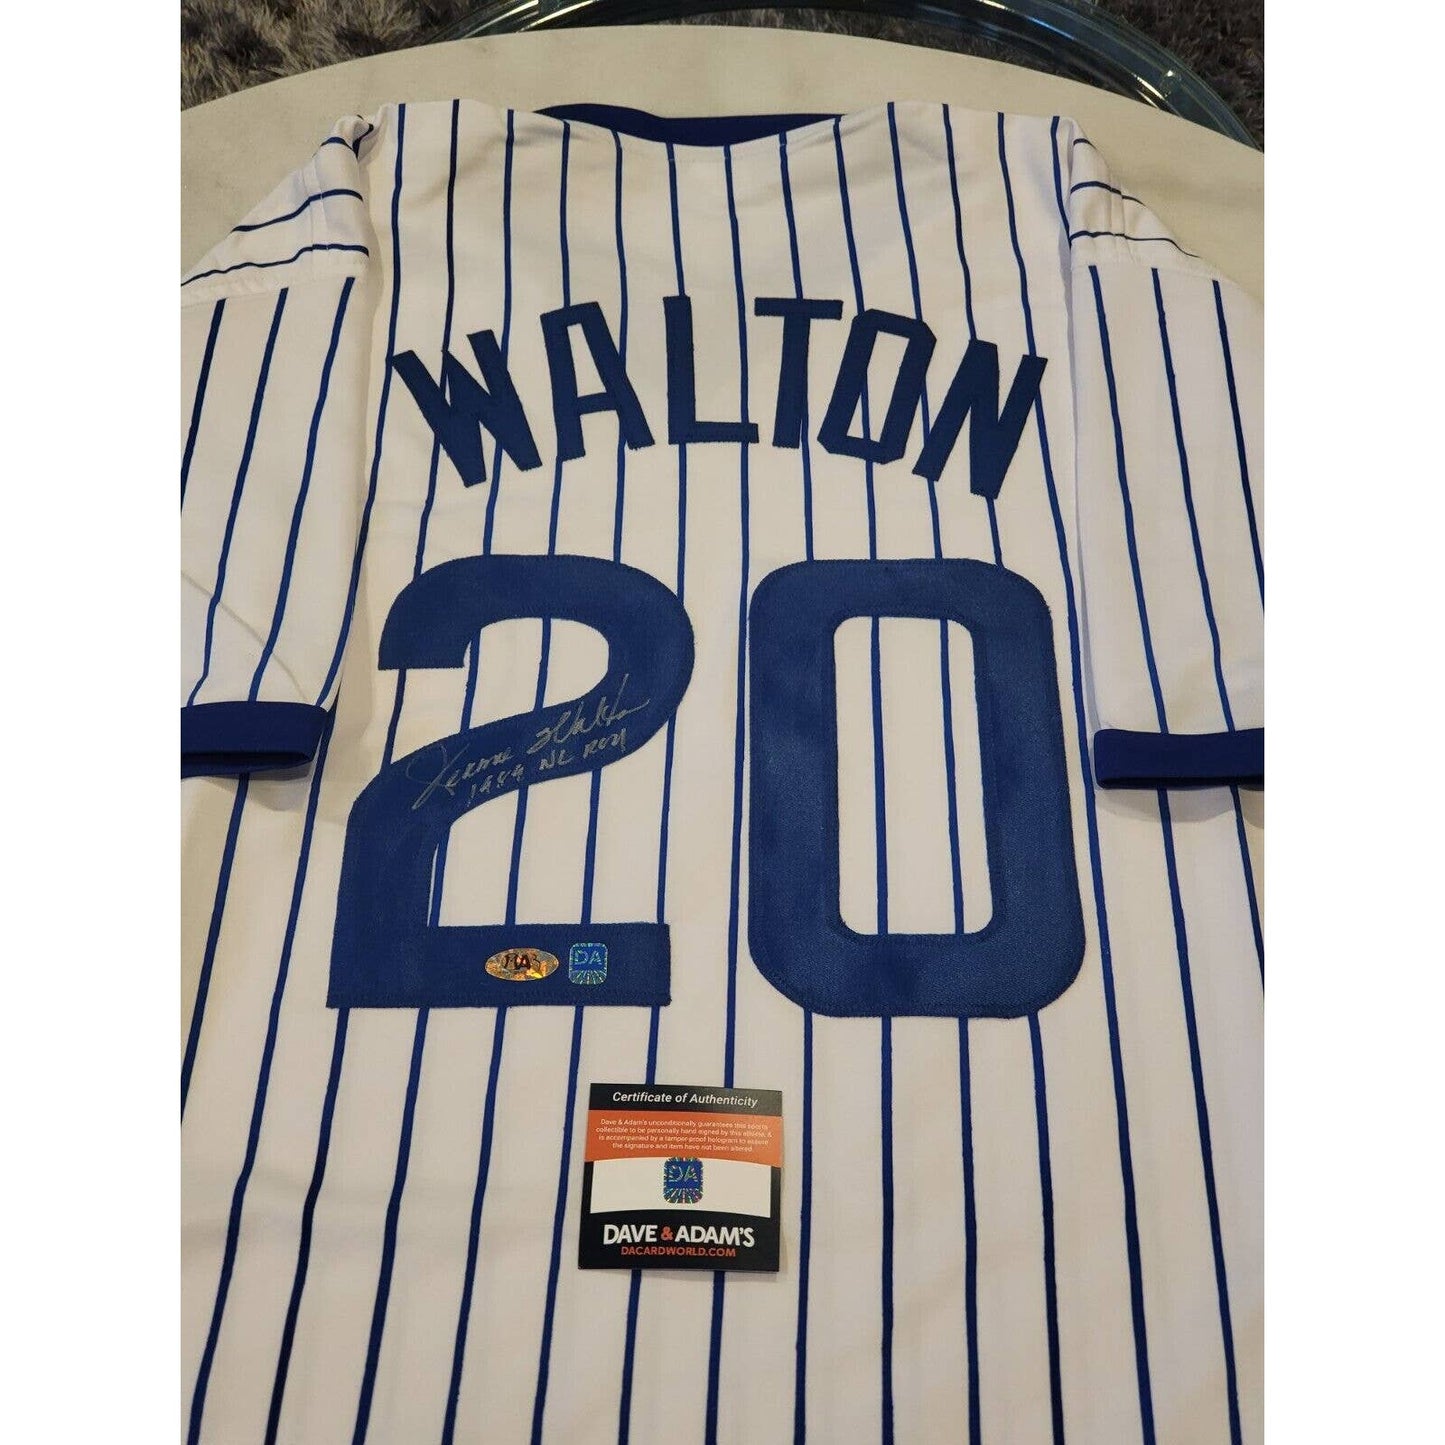 Jerome Walton Autographed/Signed Jersey COA Chicago Cubs - TreasuresEvolved